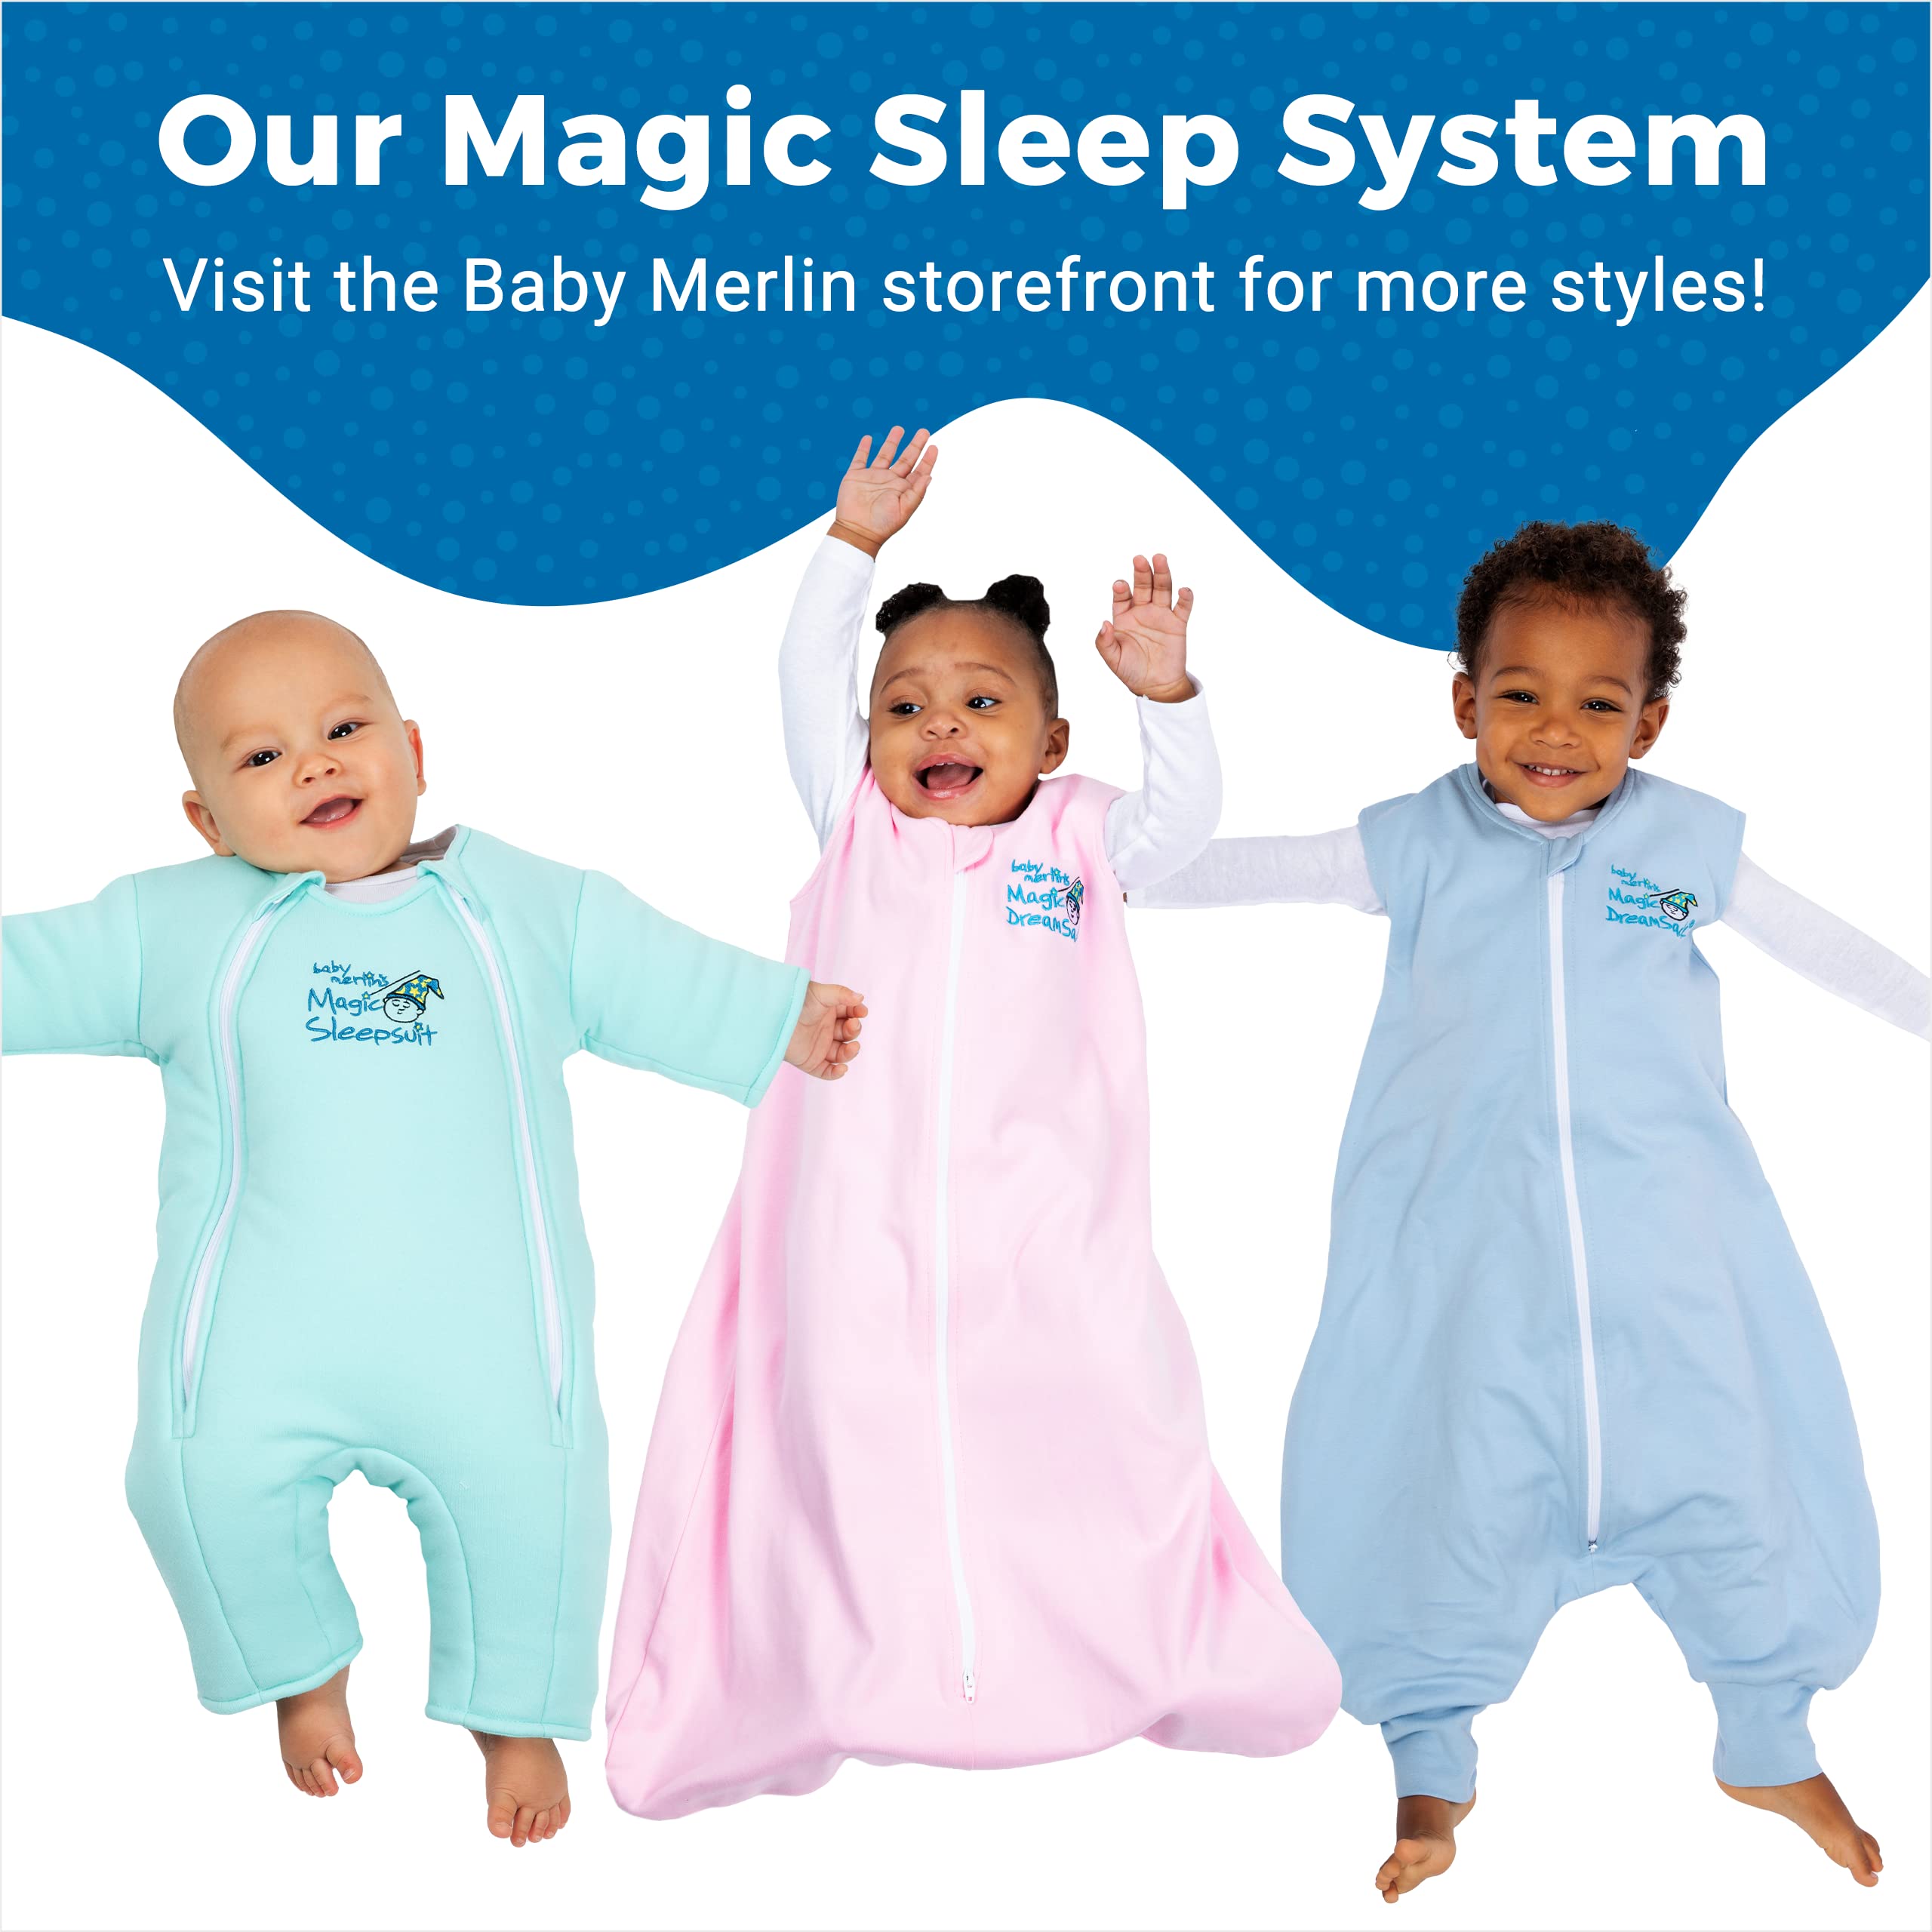 Baby Merlin's Magic Sleepsuit - 100% Cotton Baby Transition Swaddle - Baby Sleep Suit - Yellow - 6-9 Months